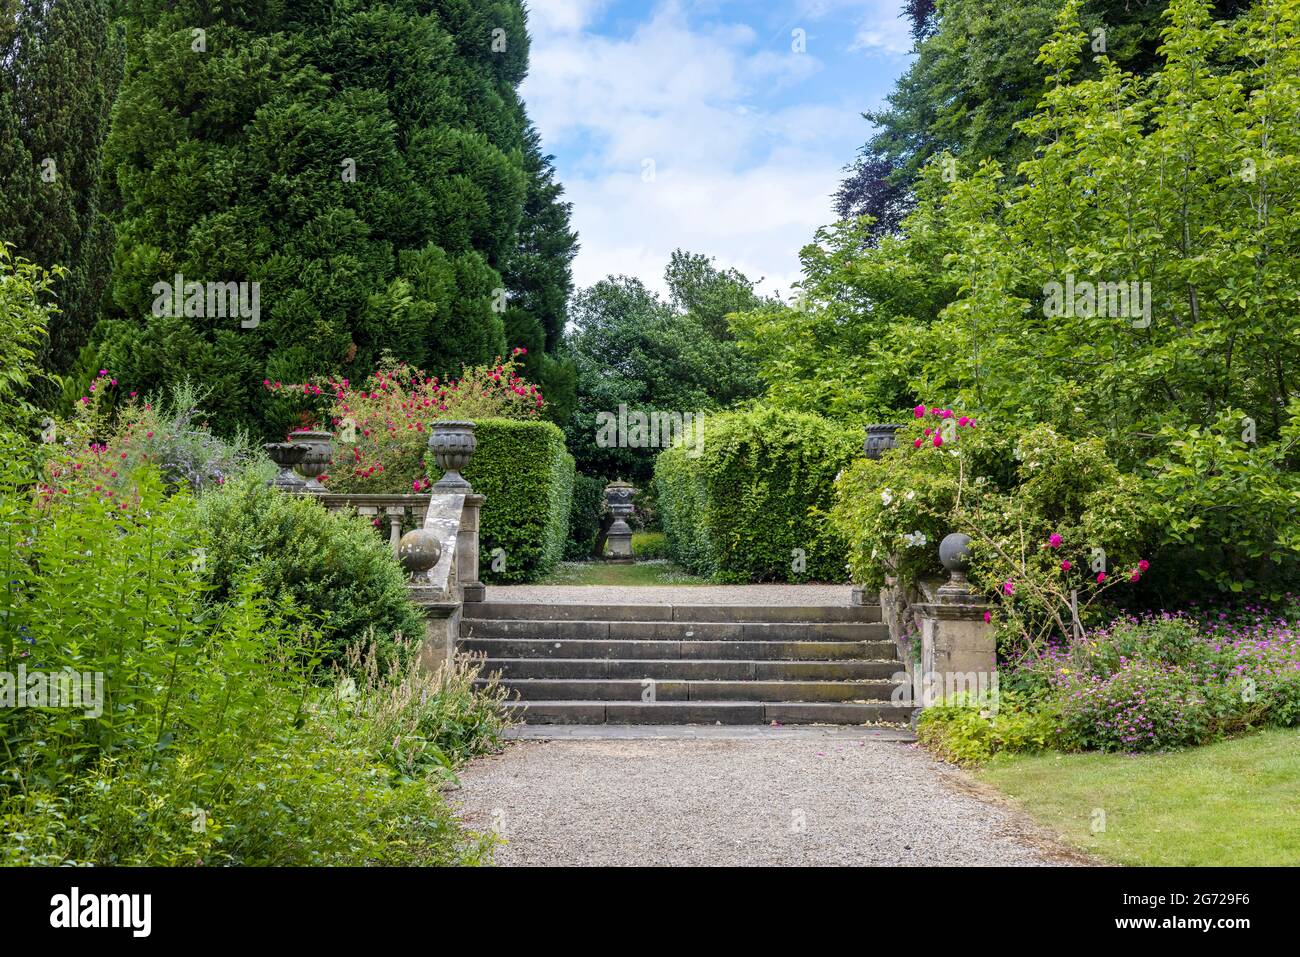 Old stone terraced garden steps and balustrade with decorative planters in a park. Stock Photo